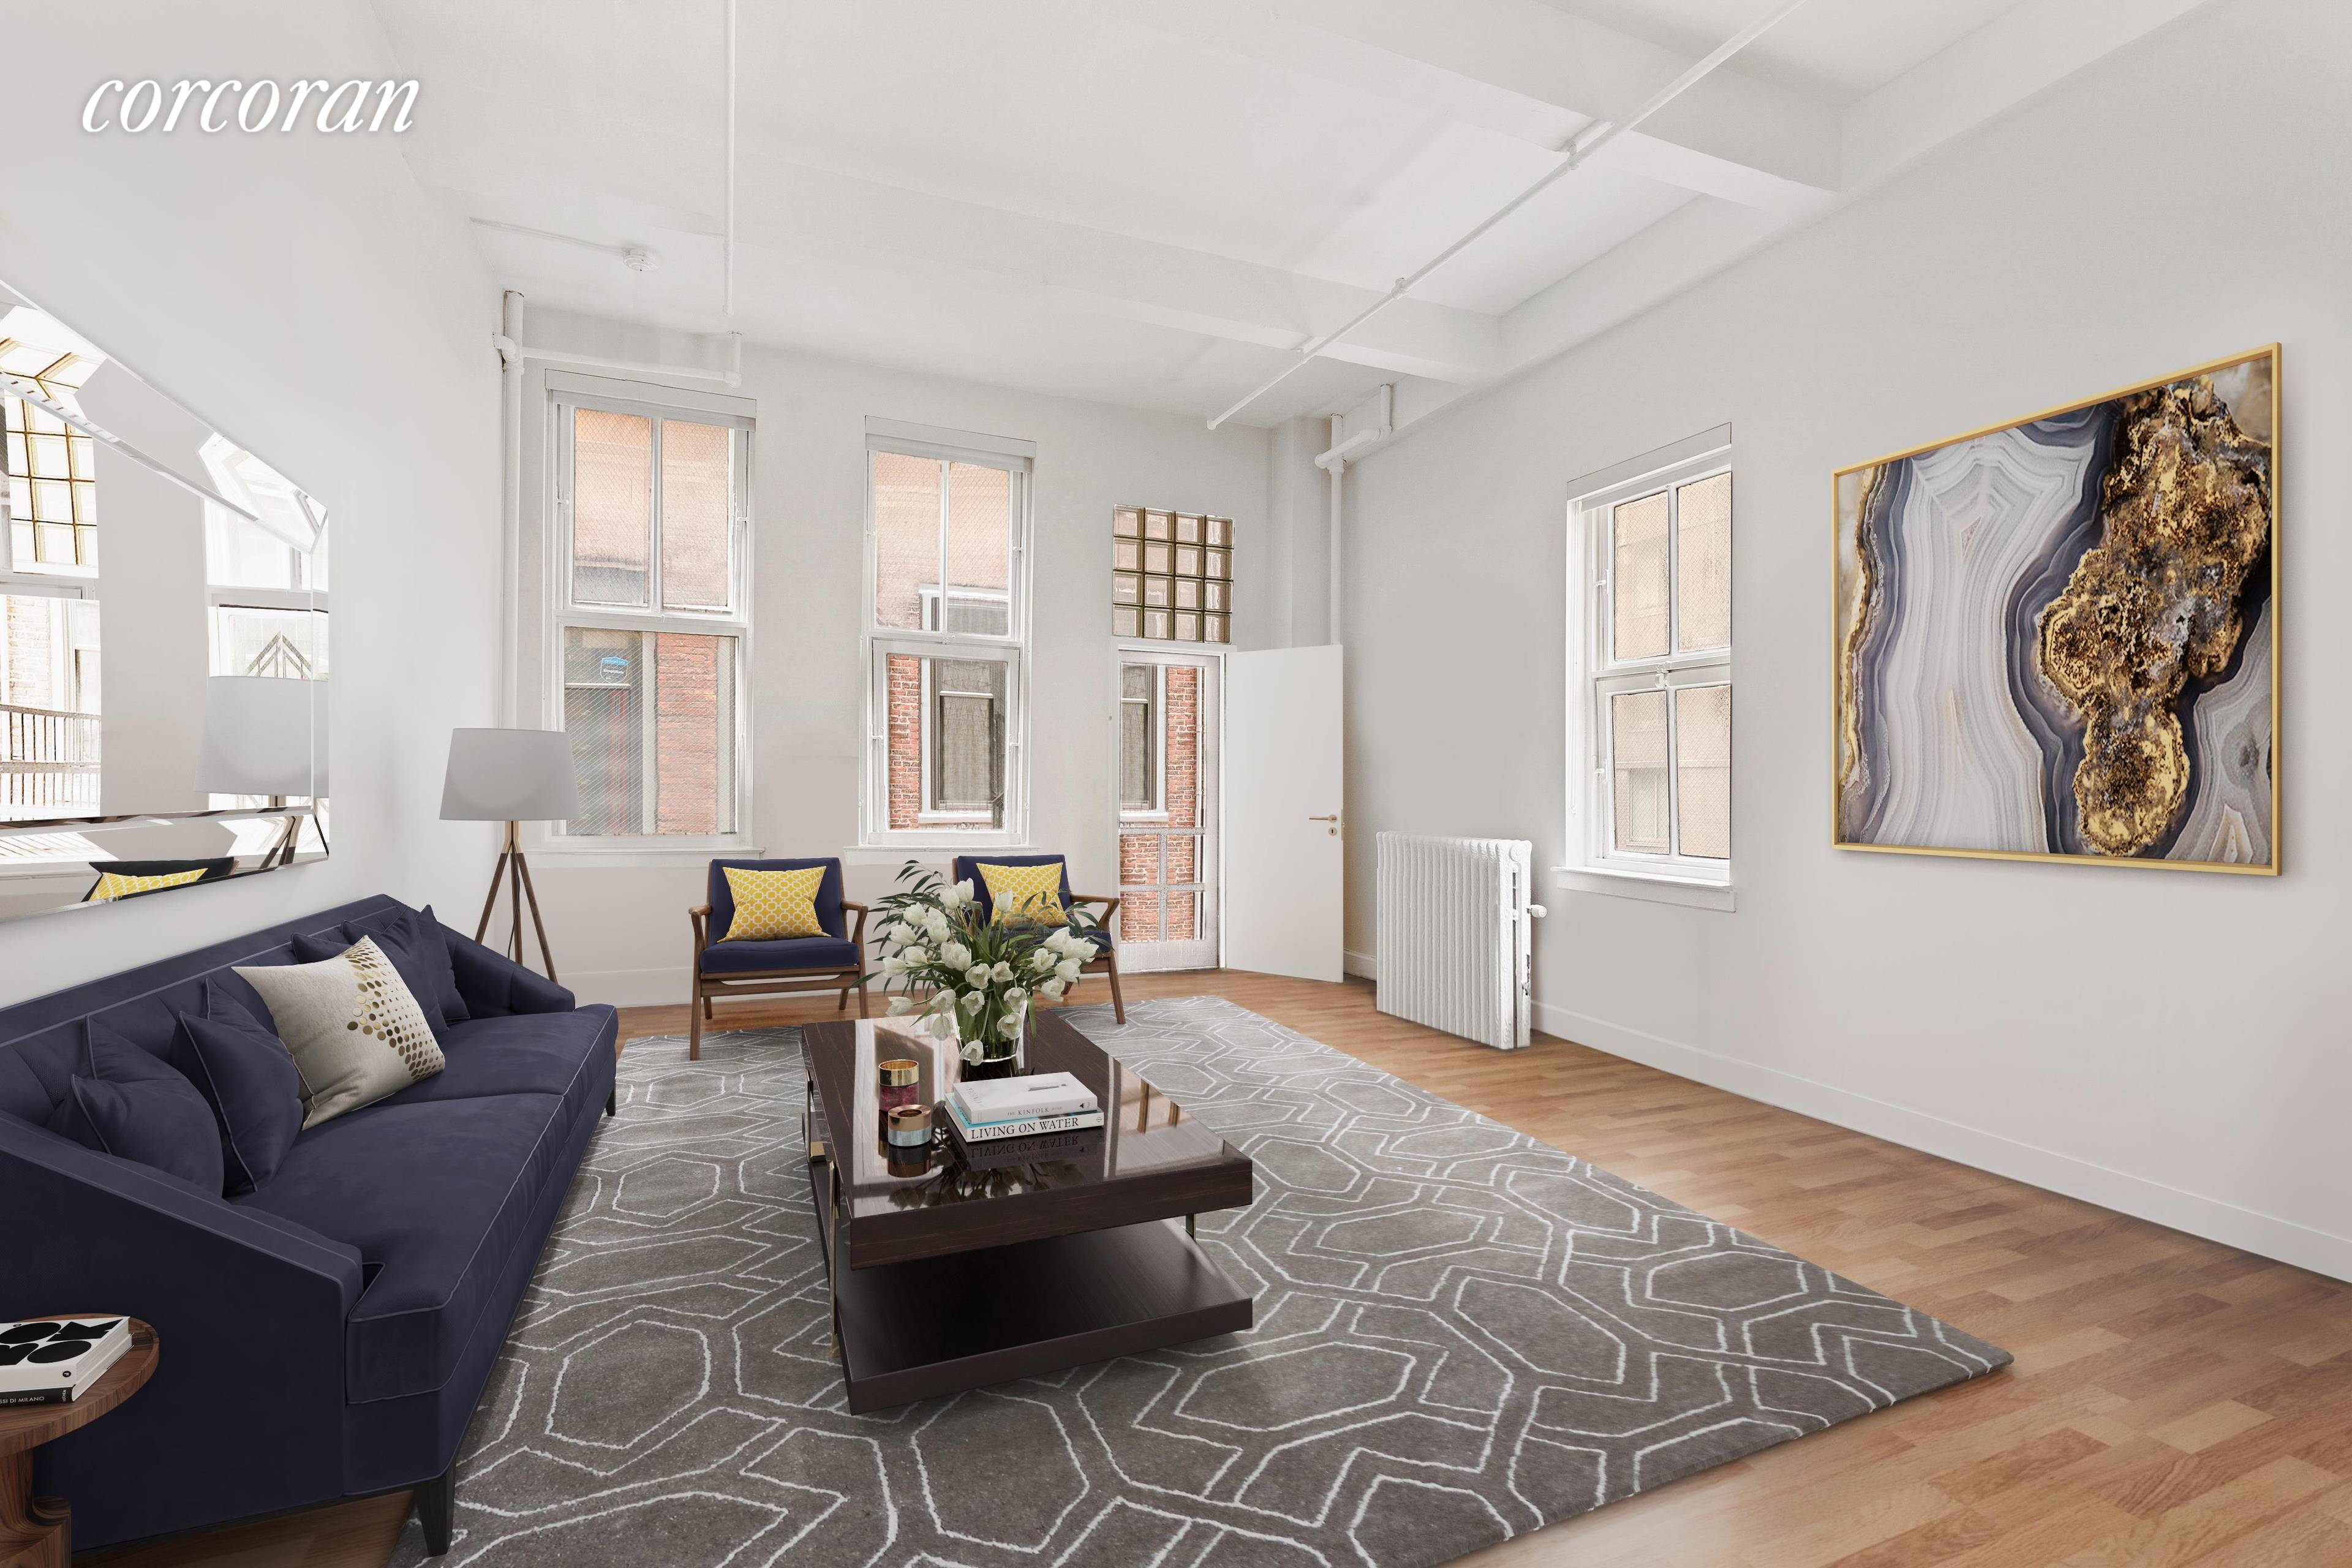 The loft residence 8B at 109 West 26th Street offers the discerning buyer unrivaled quality and composition, rich in architectural heritage and a modern aesthetic.